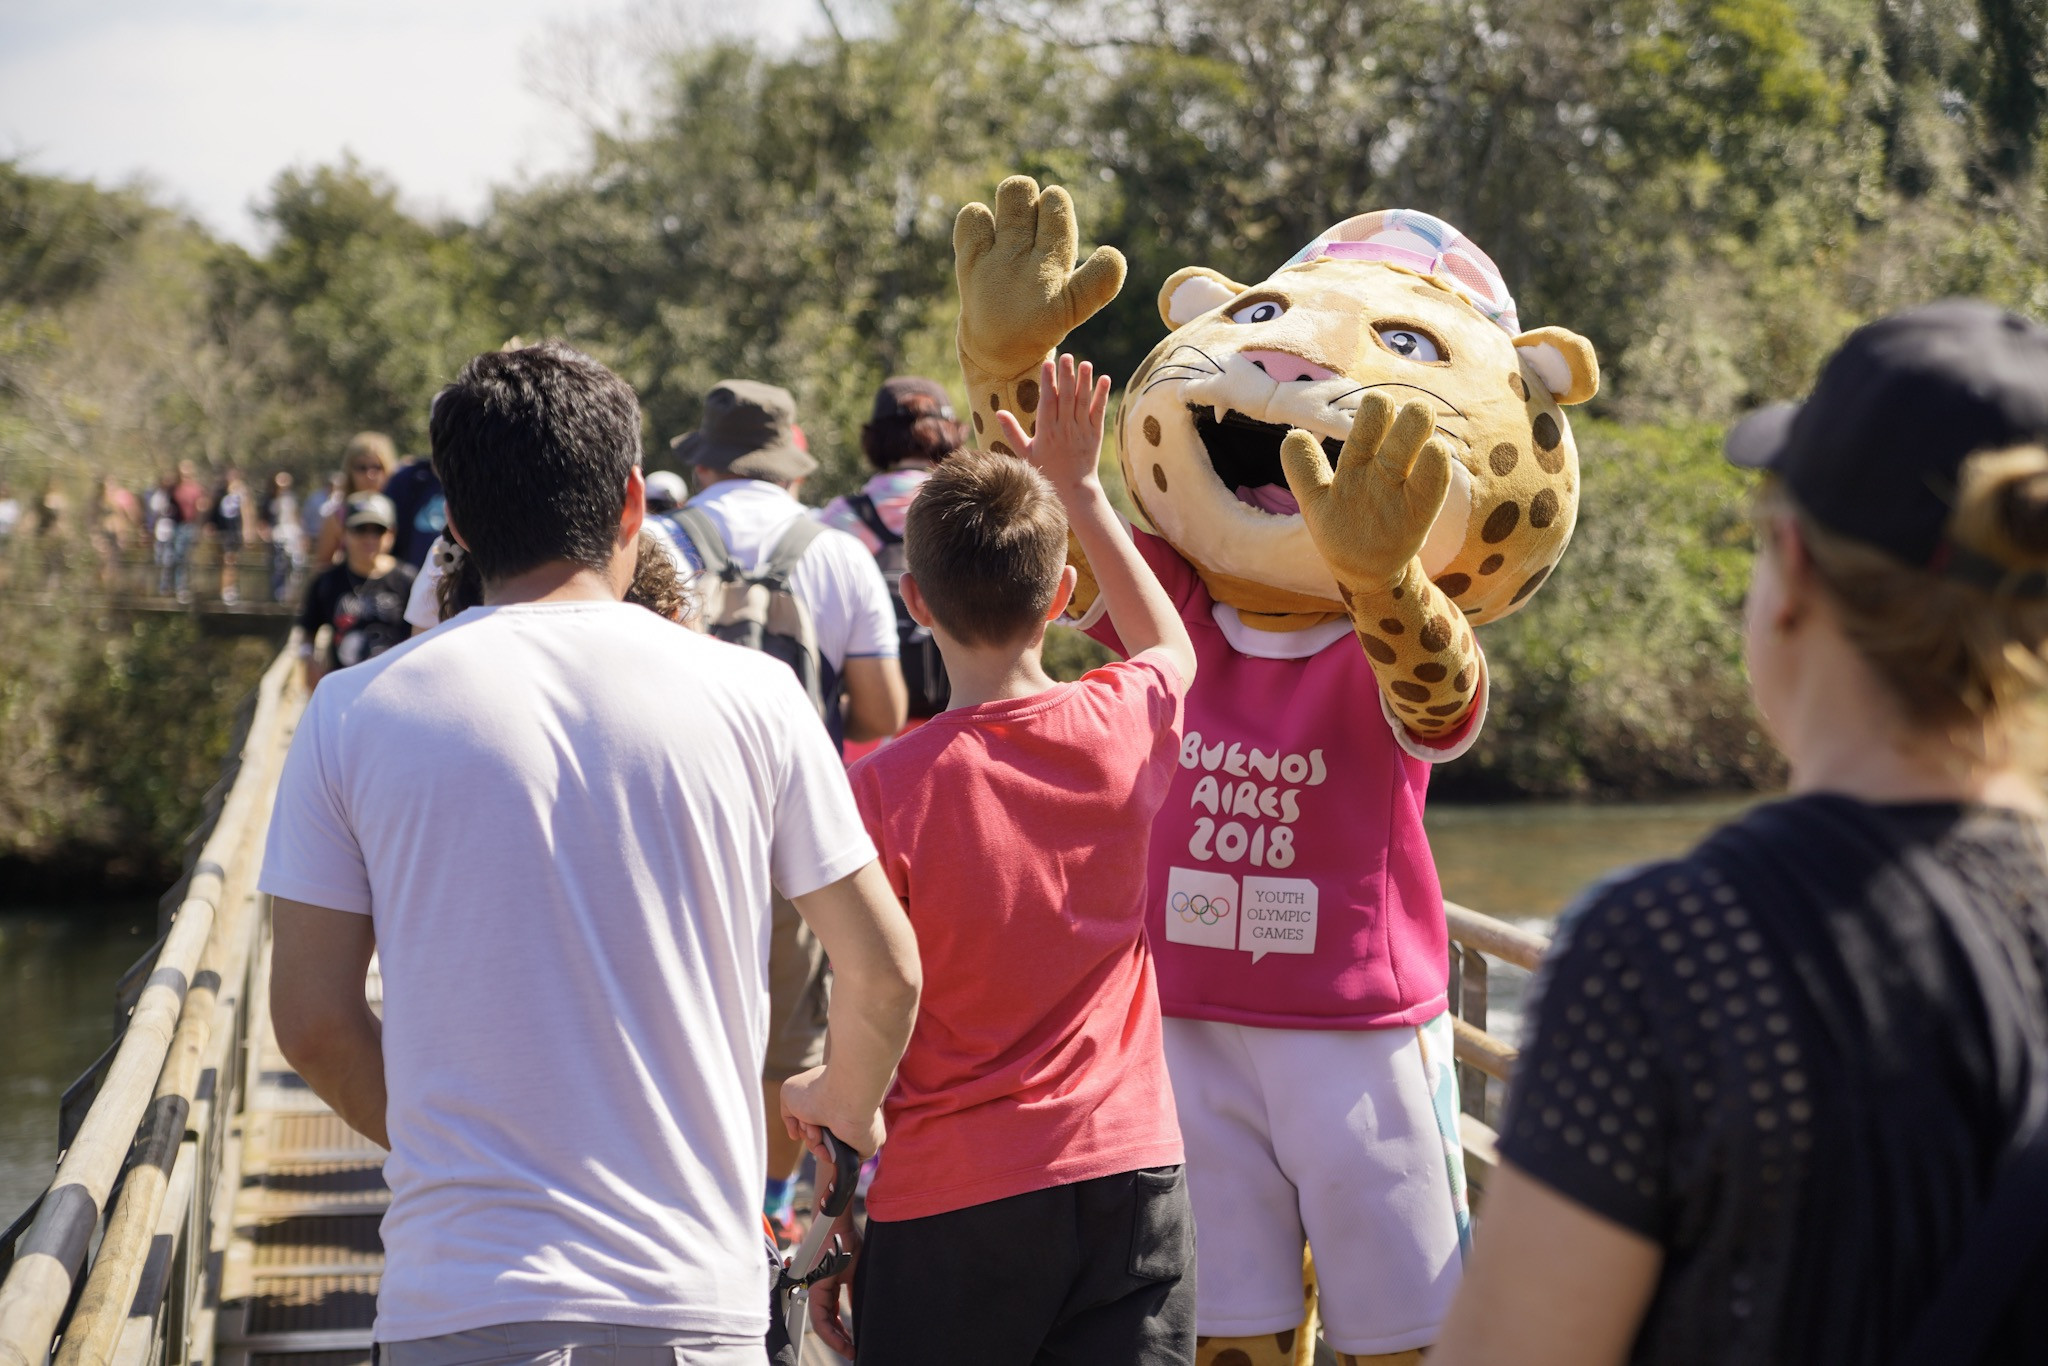 Buenos Aires 2018 mascot #Pandi the jaguar was also in attendance at the Falls ©Buenos Aires 2018